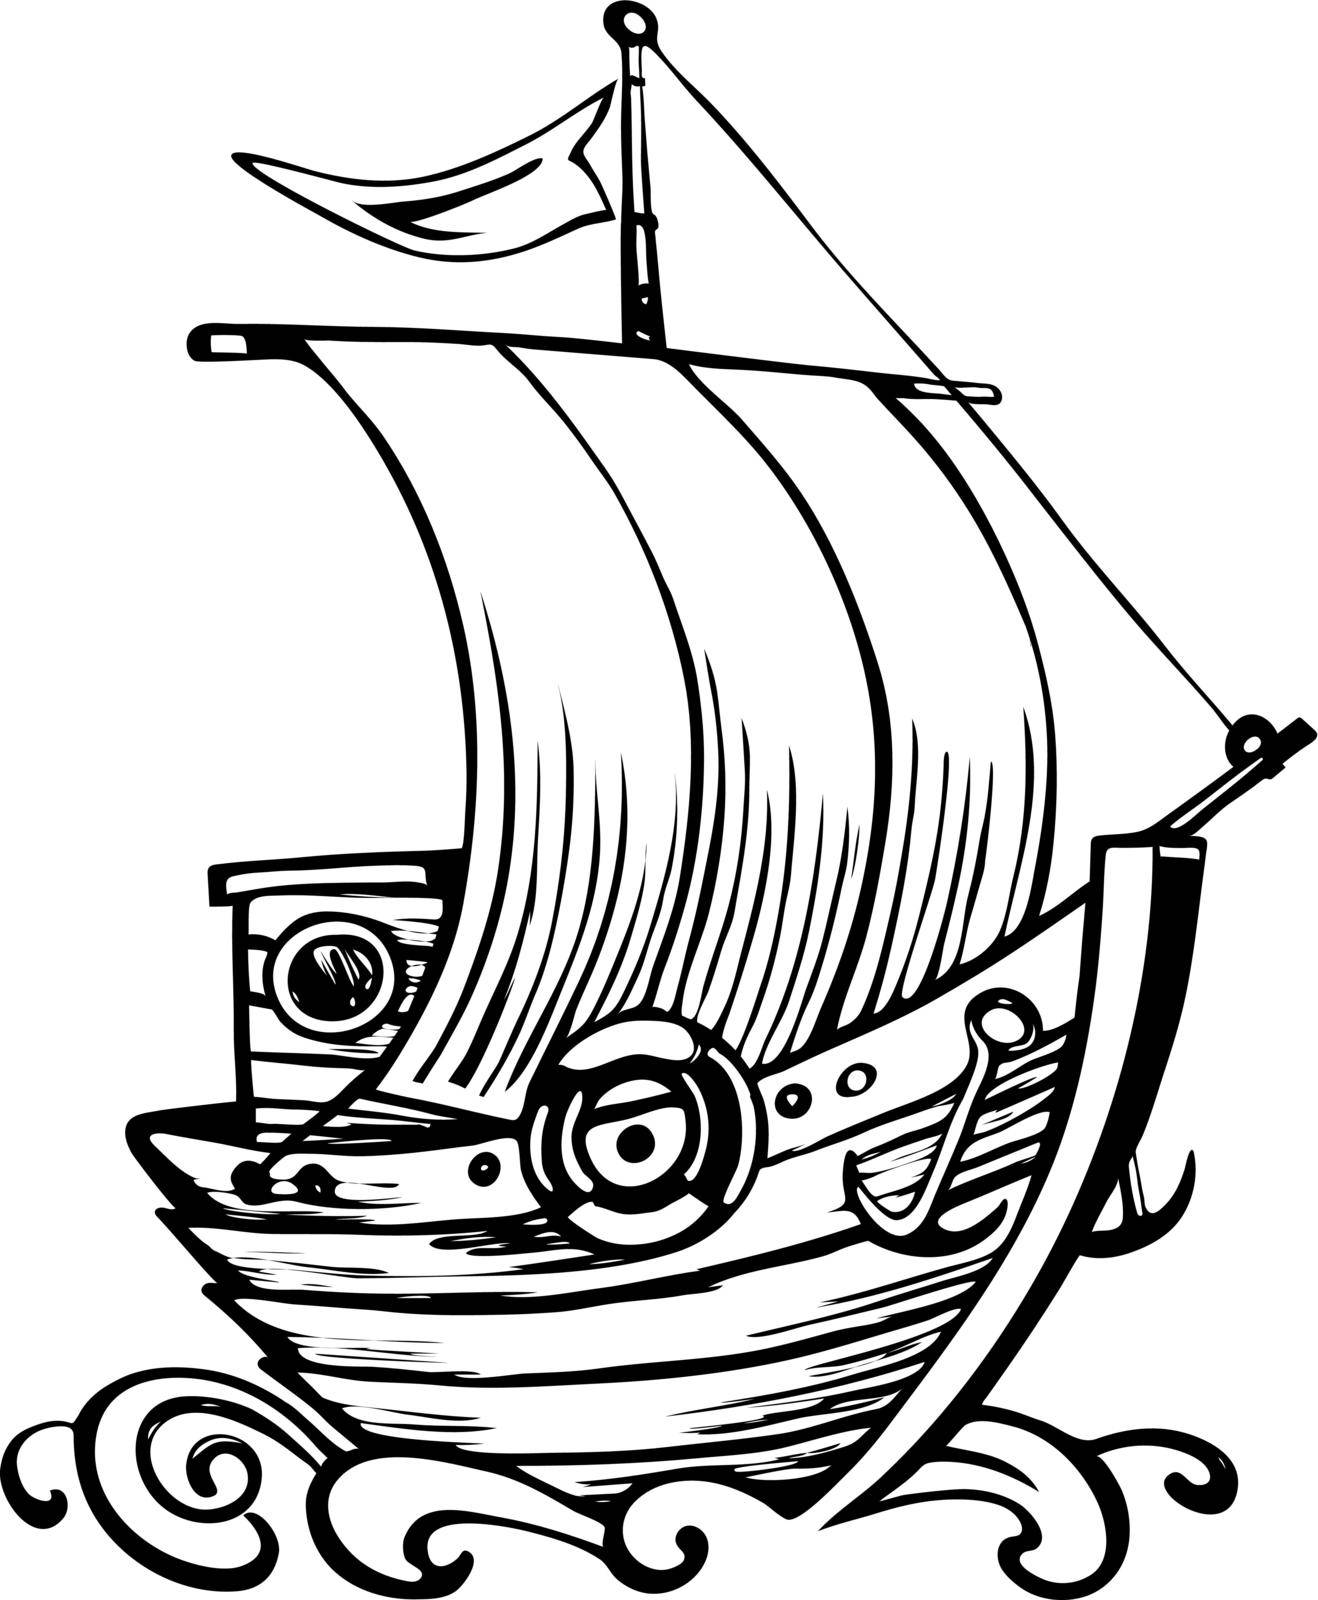 Illustration old ship with waves in style retro design. Vintage nautical ship, vintage sailing boat. Hand-drawn sketch.